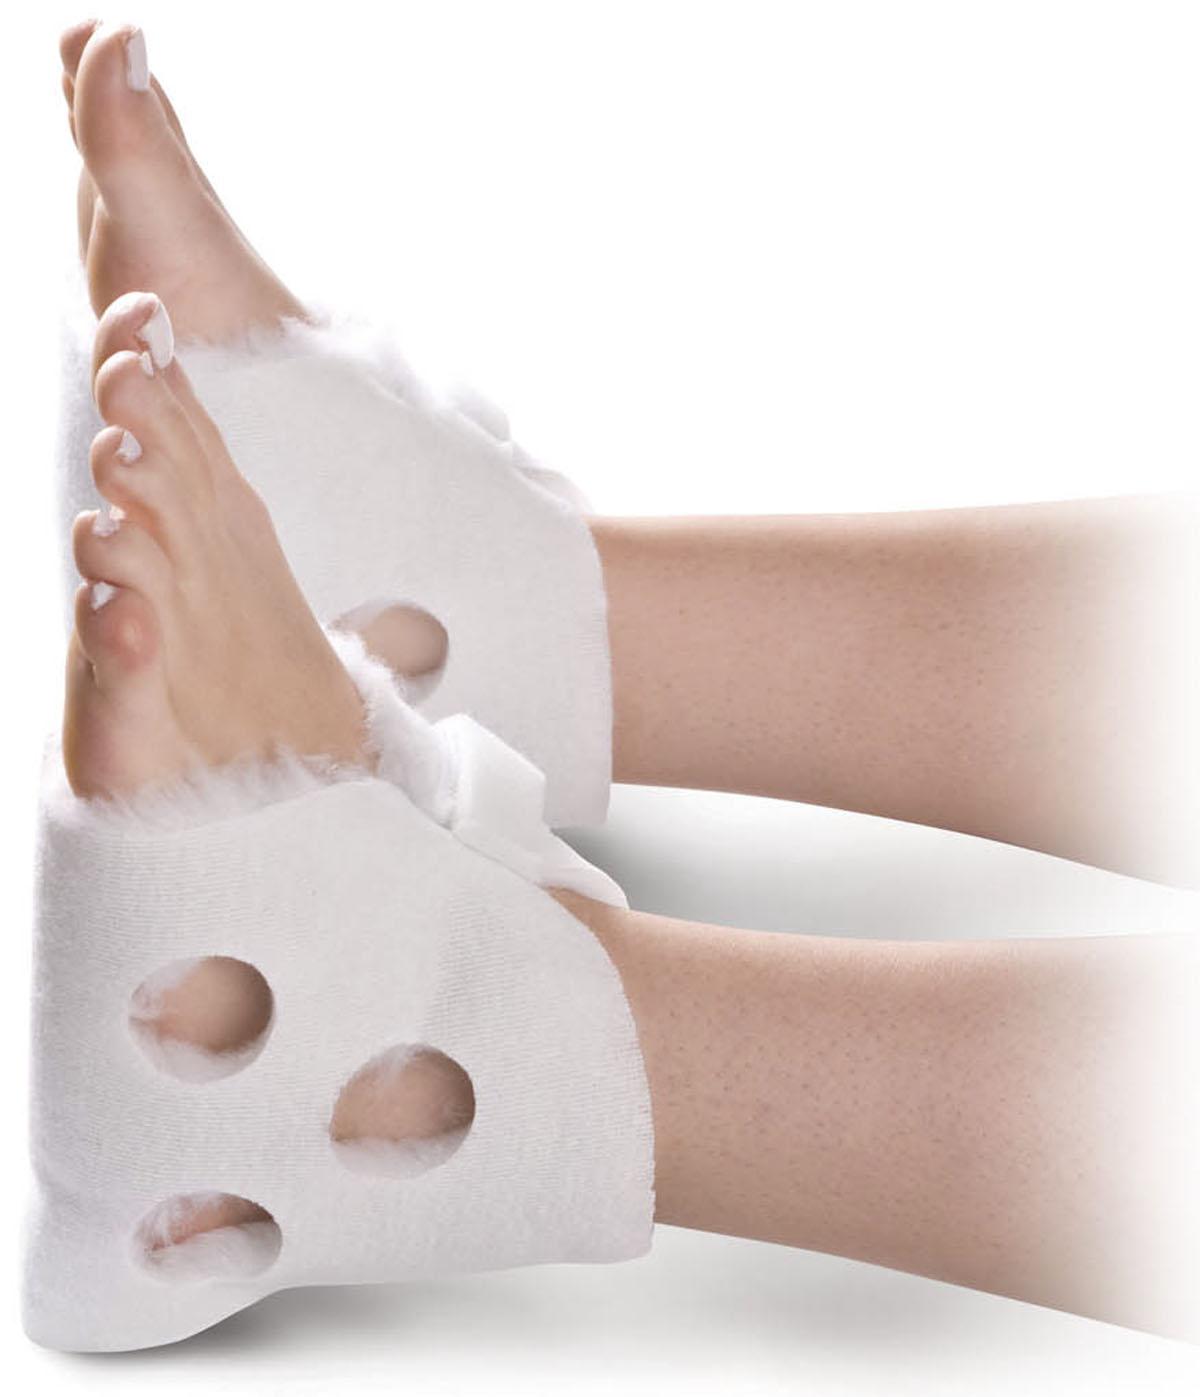 1 Pair-Pair / White / Unisize Body Positioning - MEDLINE - Wasatch Medical Supply